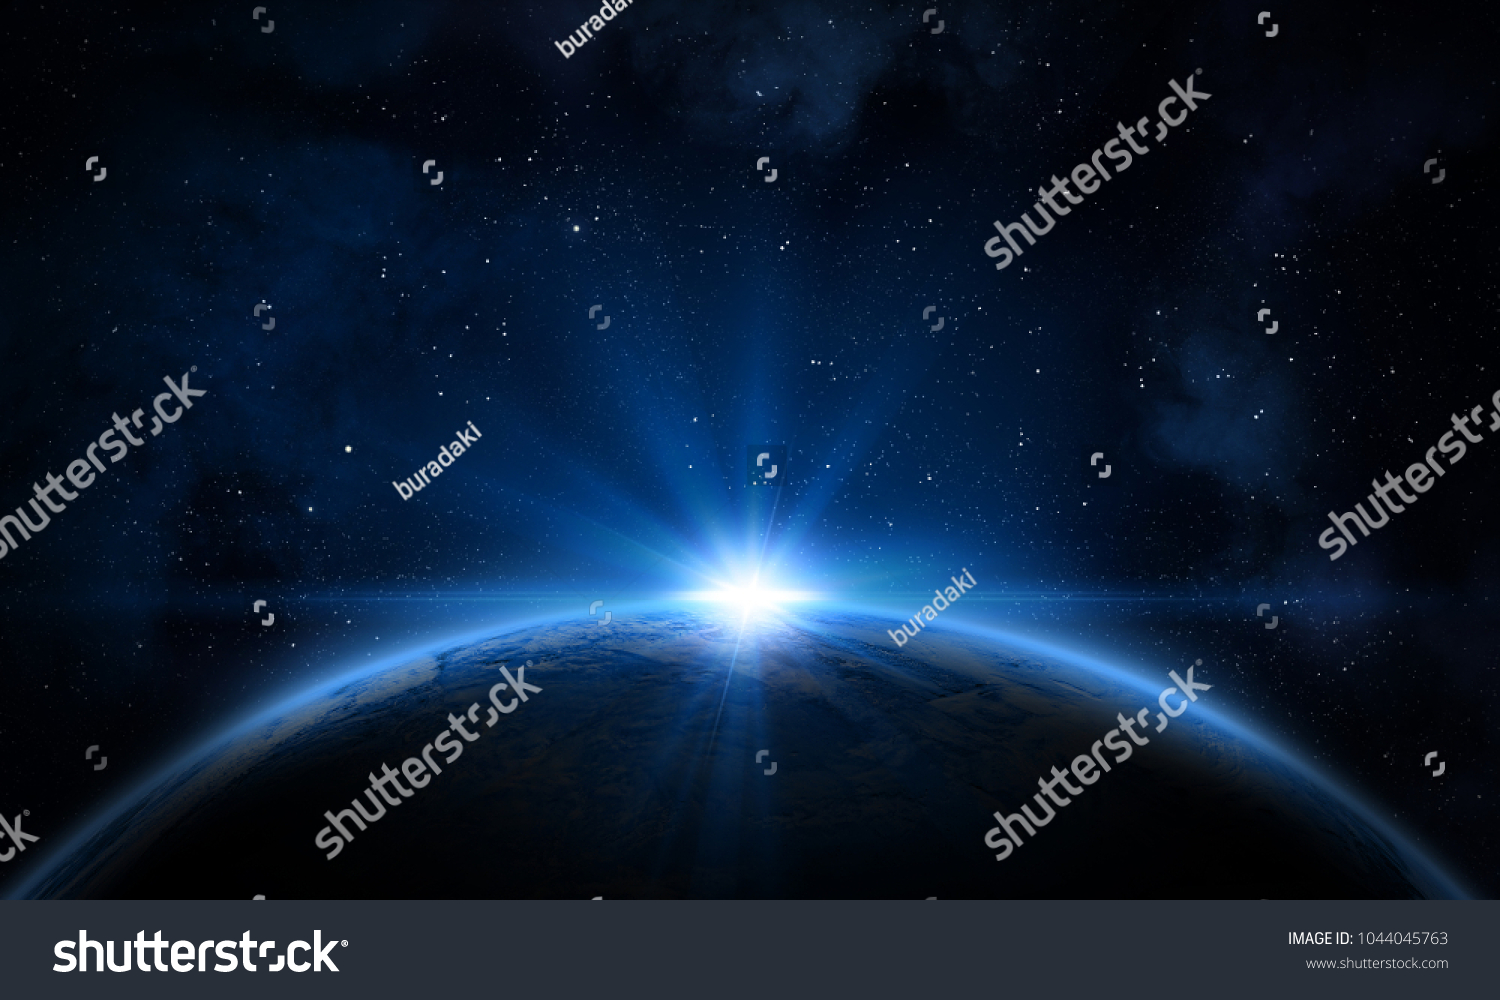 Earth, galaxy, nebula and Sun. Elements of this image furnished by NASA. #1044045763